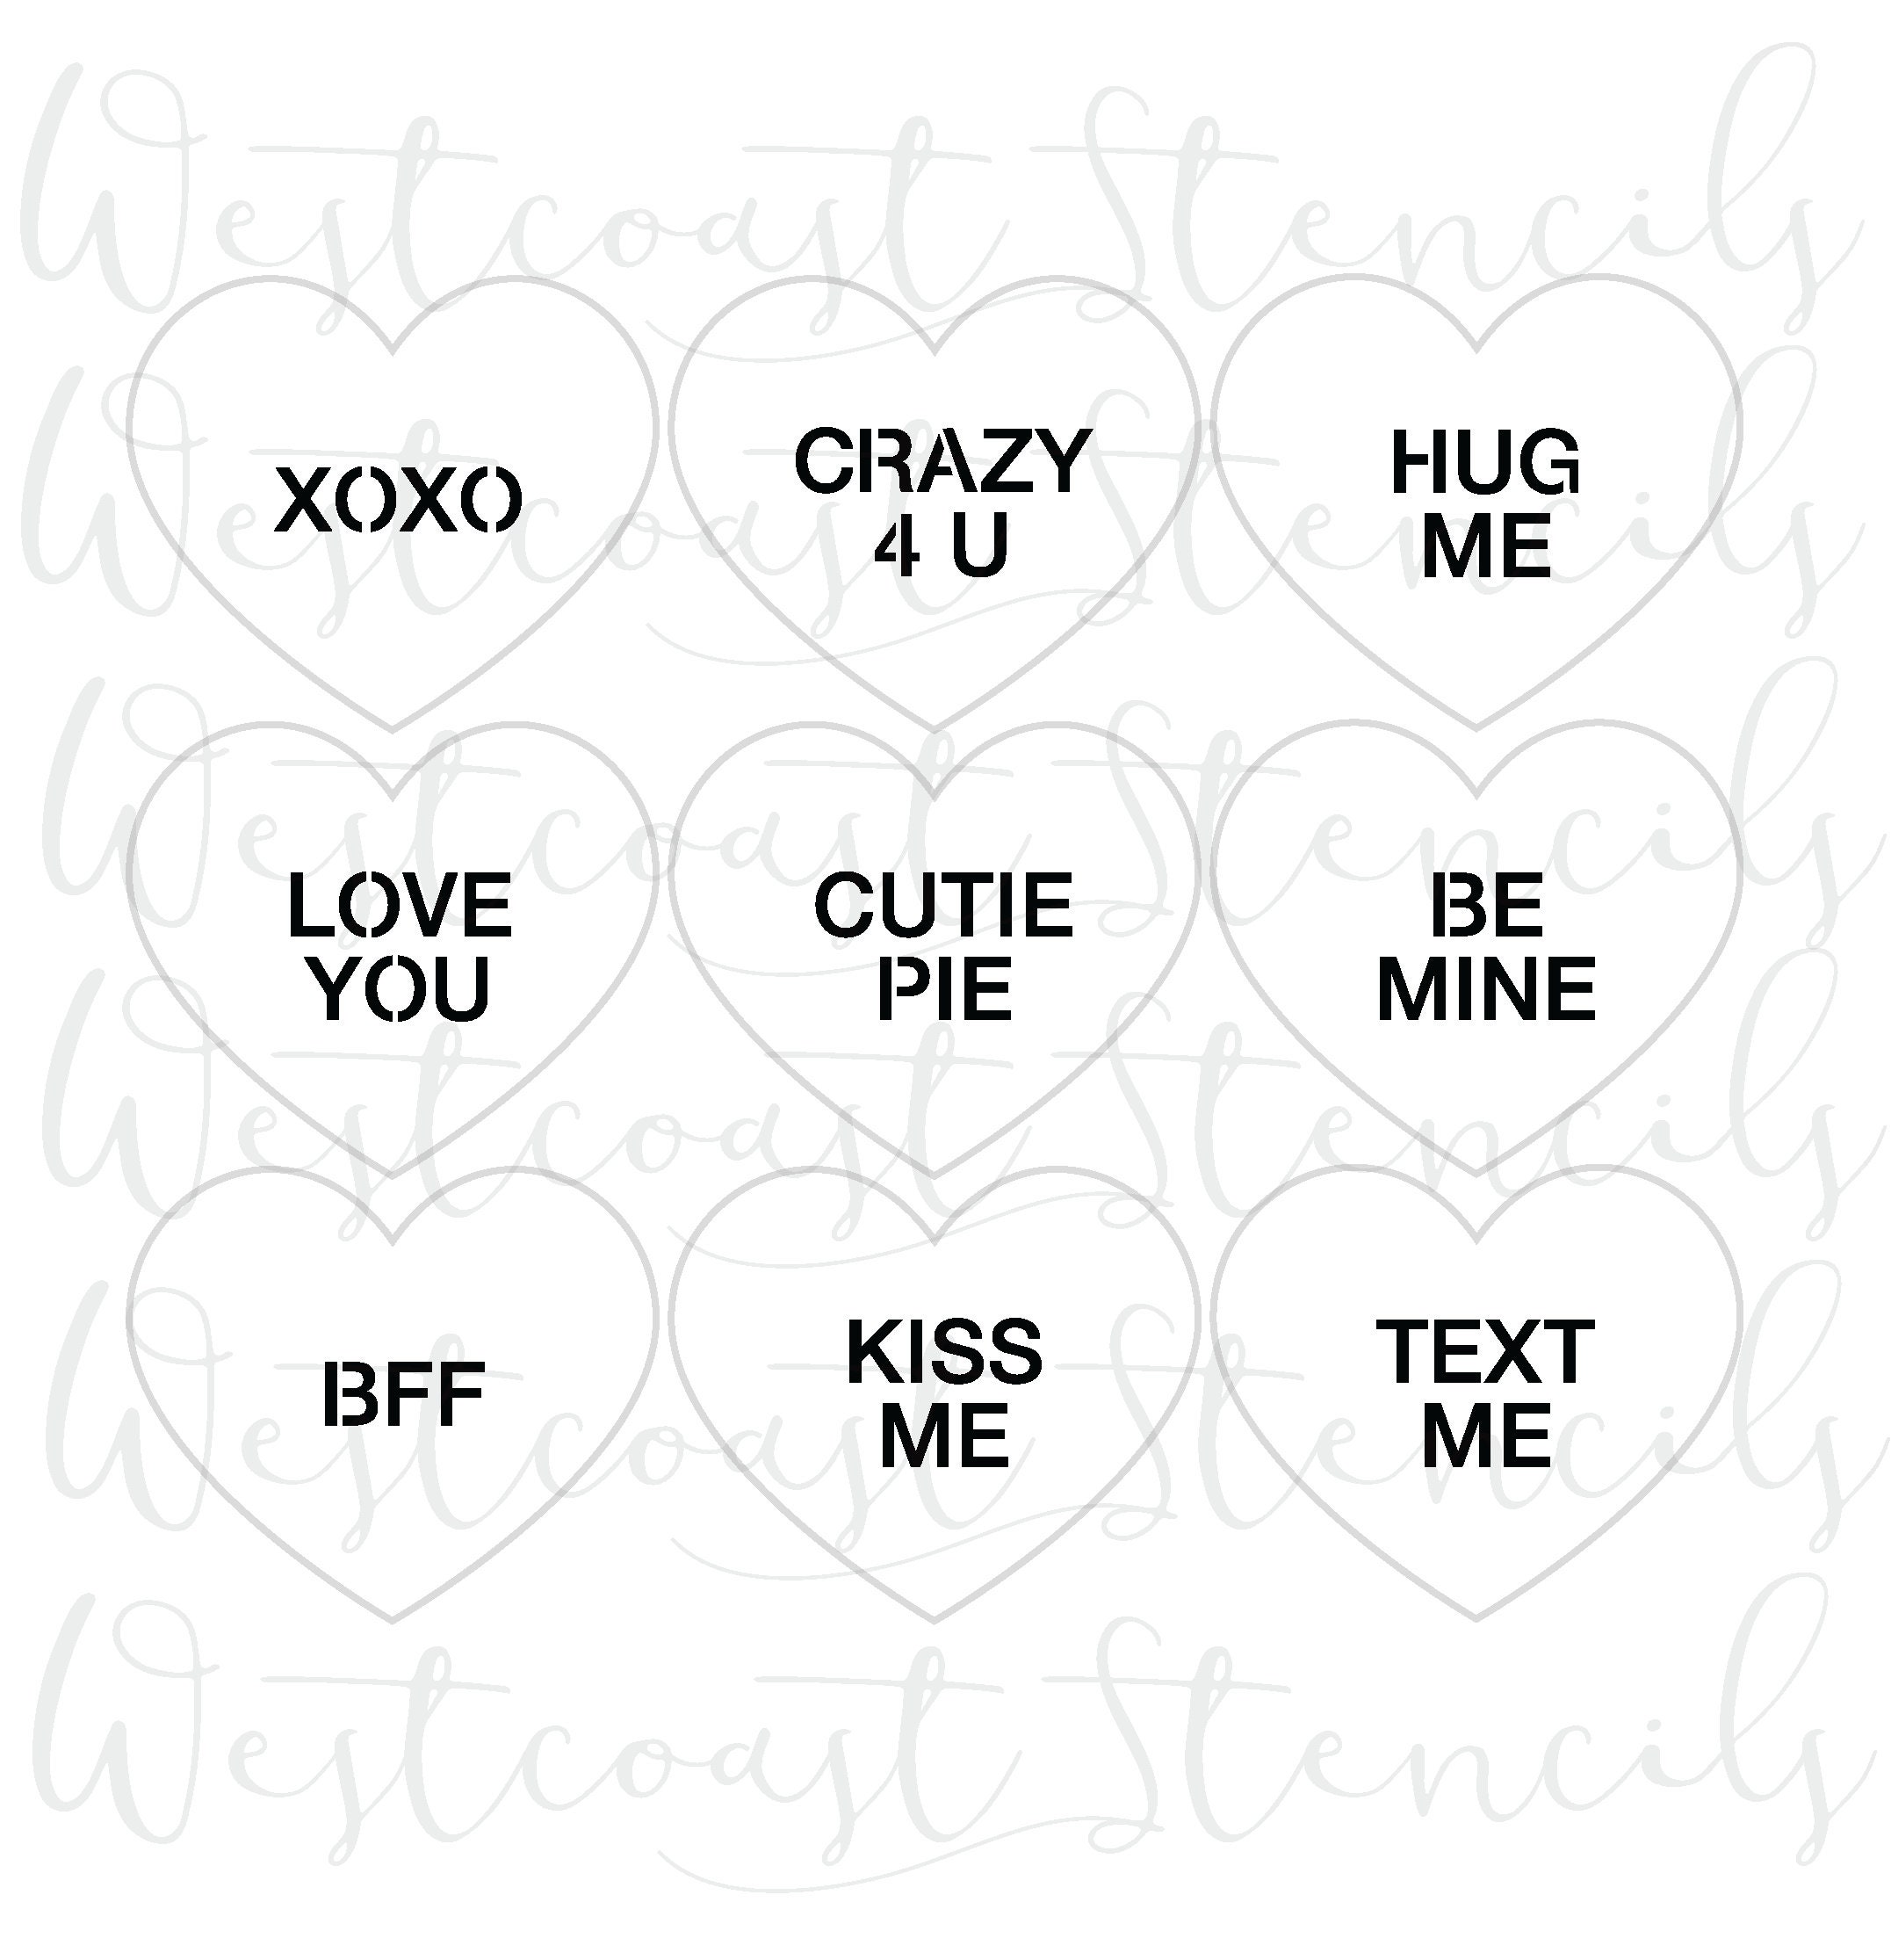 Click here for more Free Valentine's Day Stencils